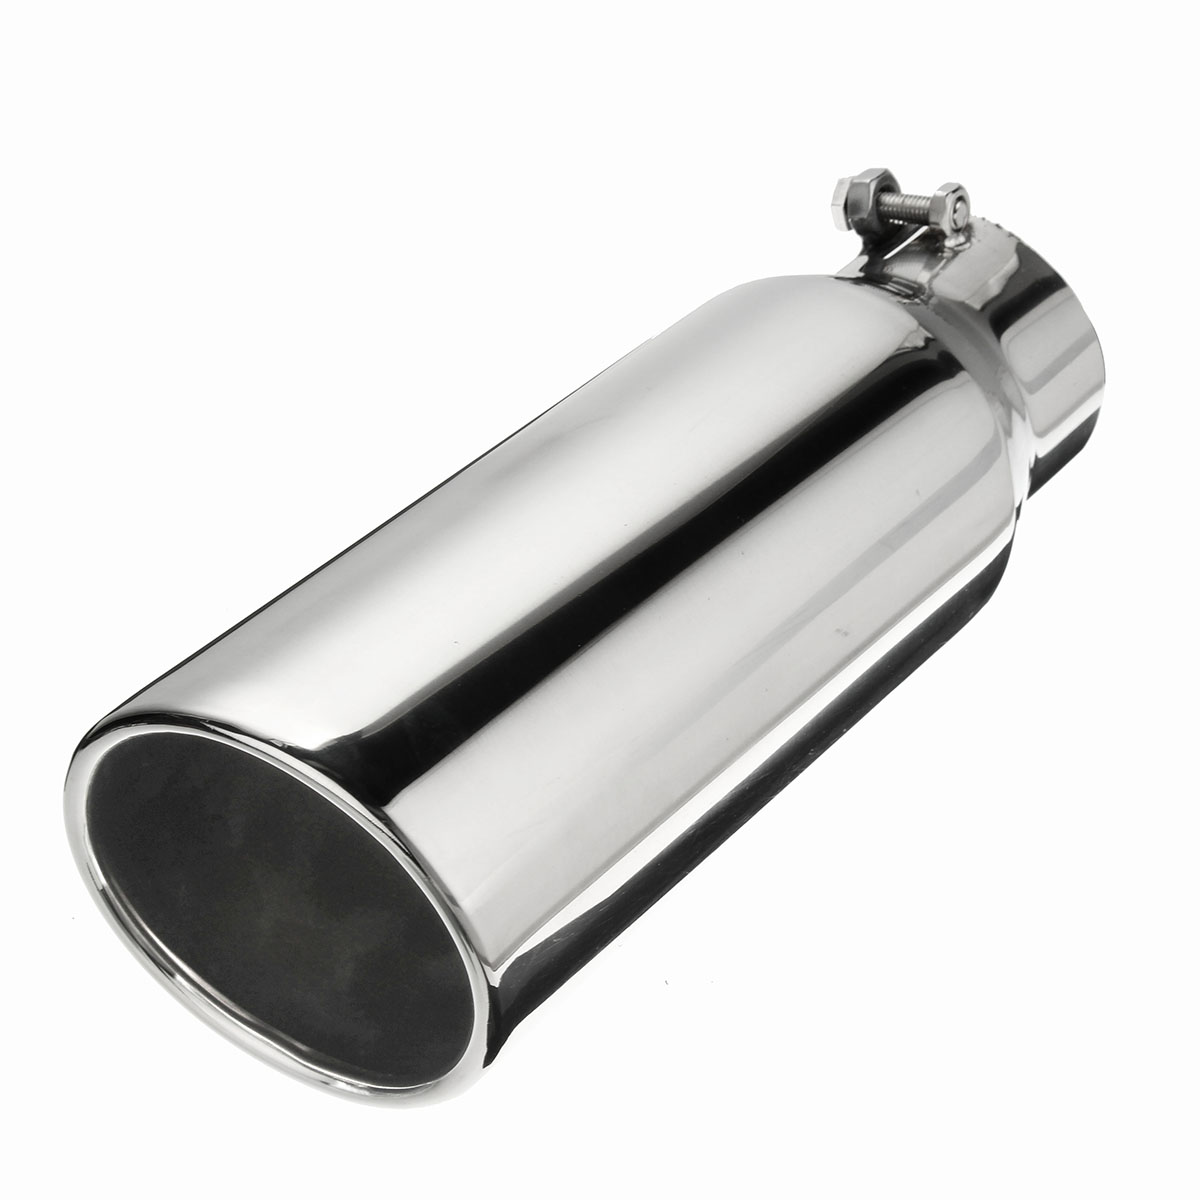 Stainless-Steel-3-Inch-Inlet-4-Inch-Outlet-12inch-Long-Bolt-On-Diesel-Exhaust-Muffler-1417113